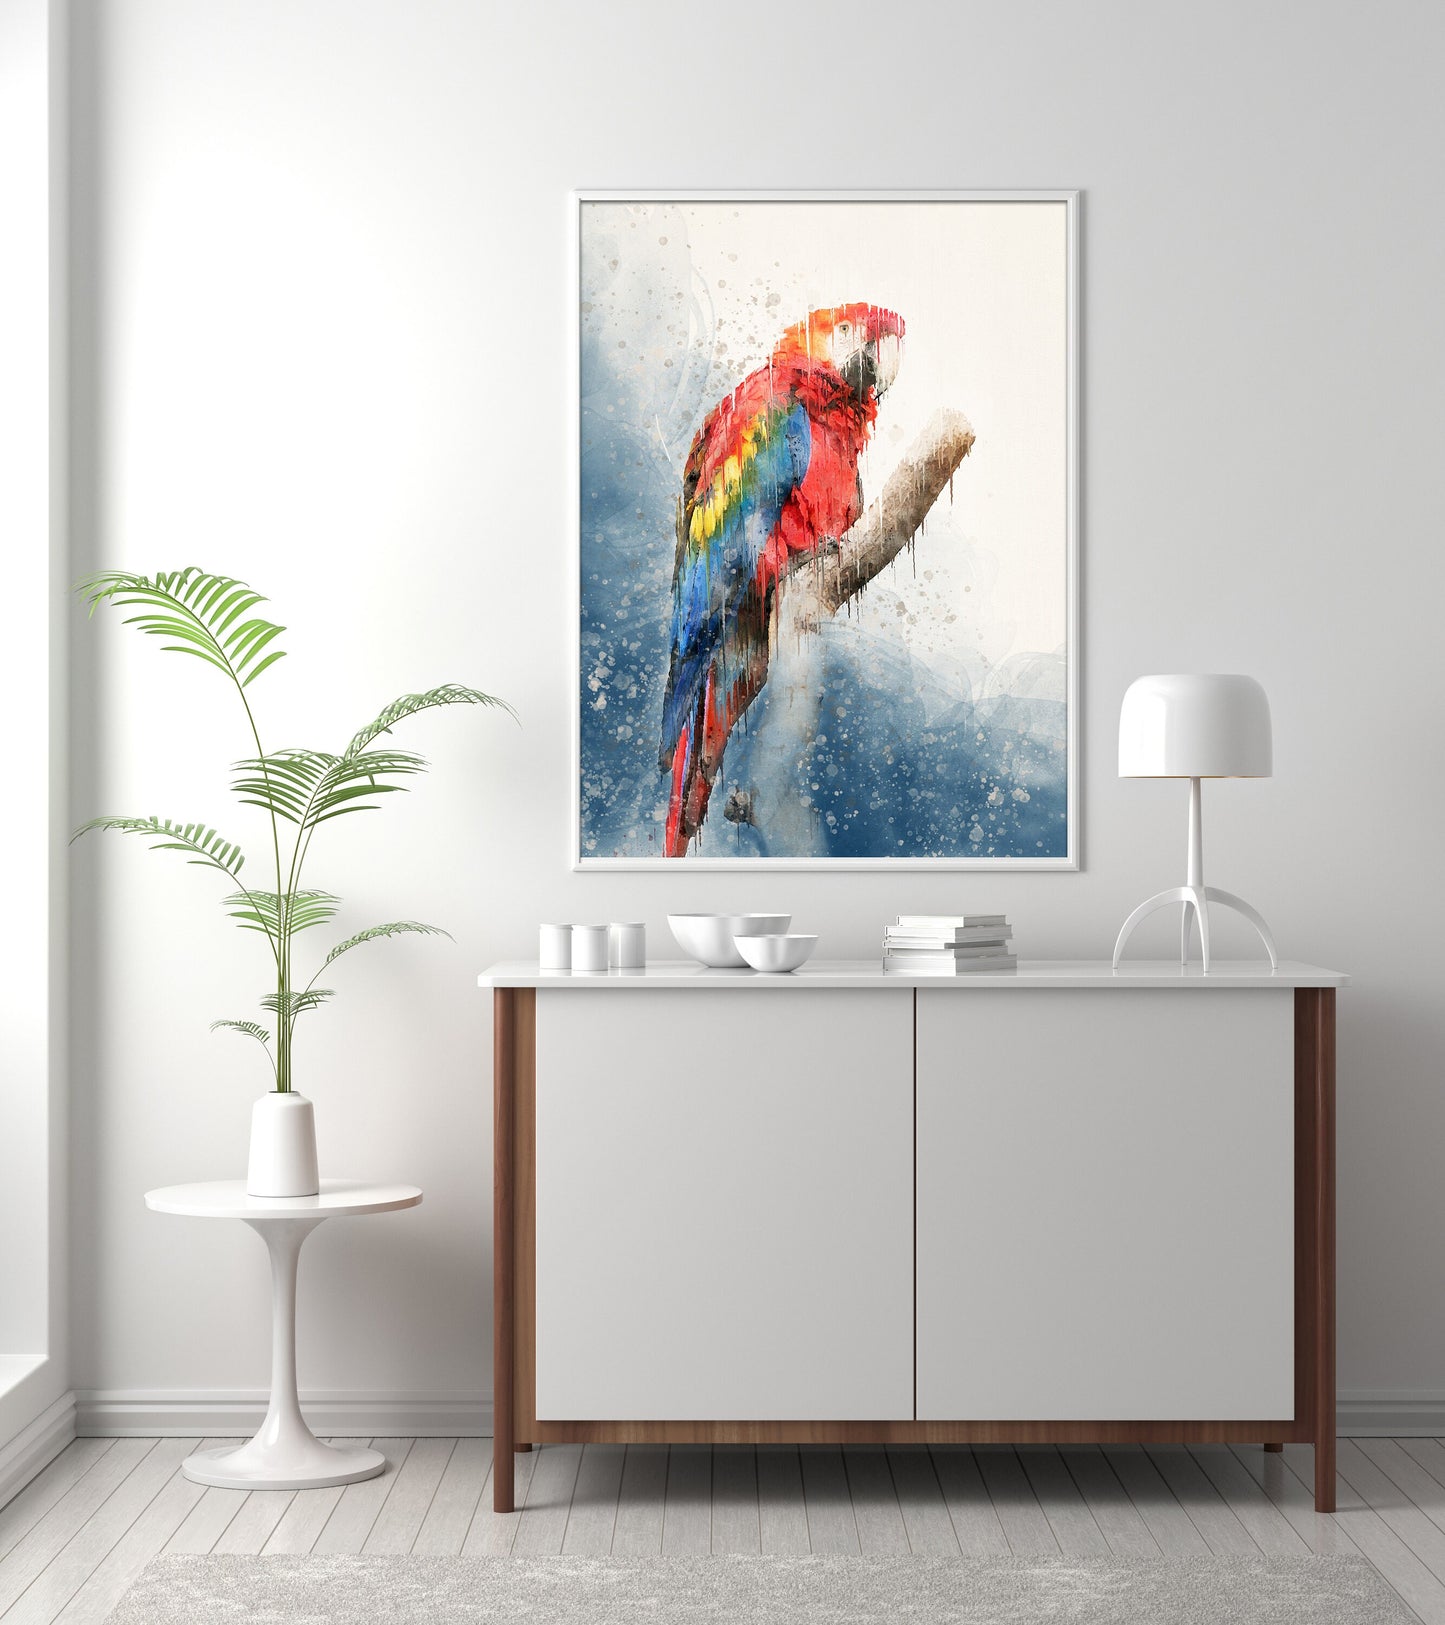 Parrot Print, Red, Macaw, Bird Prints, Rainforest, Bedroom Wall Art, Watercolor Painting, Canvas Print